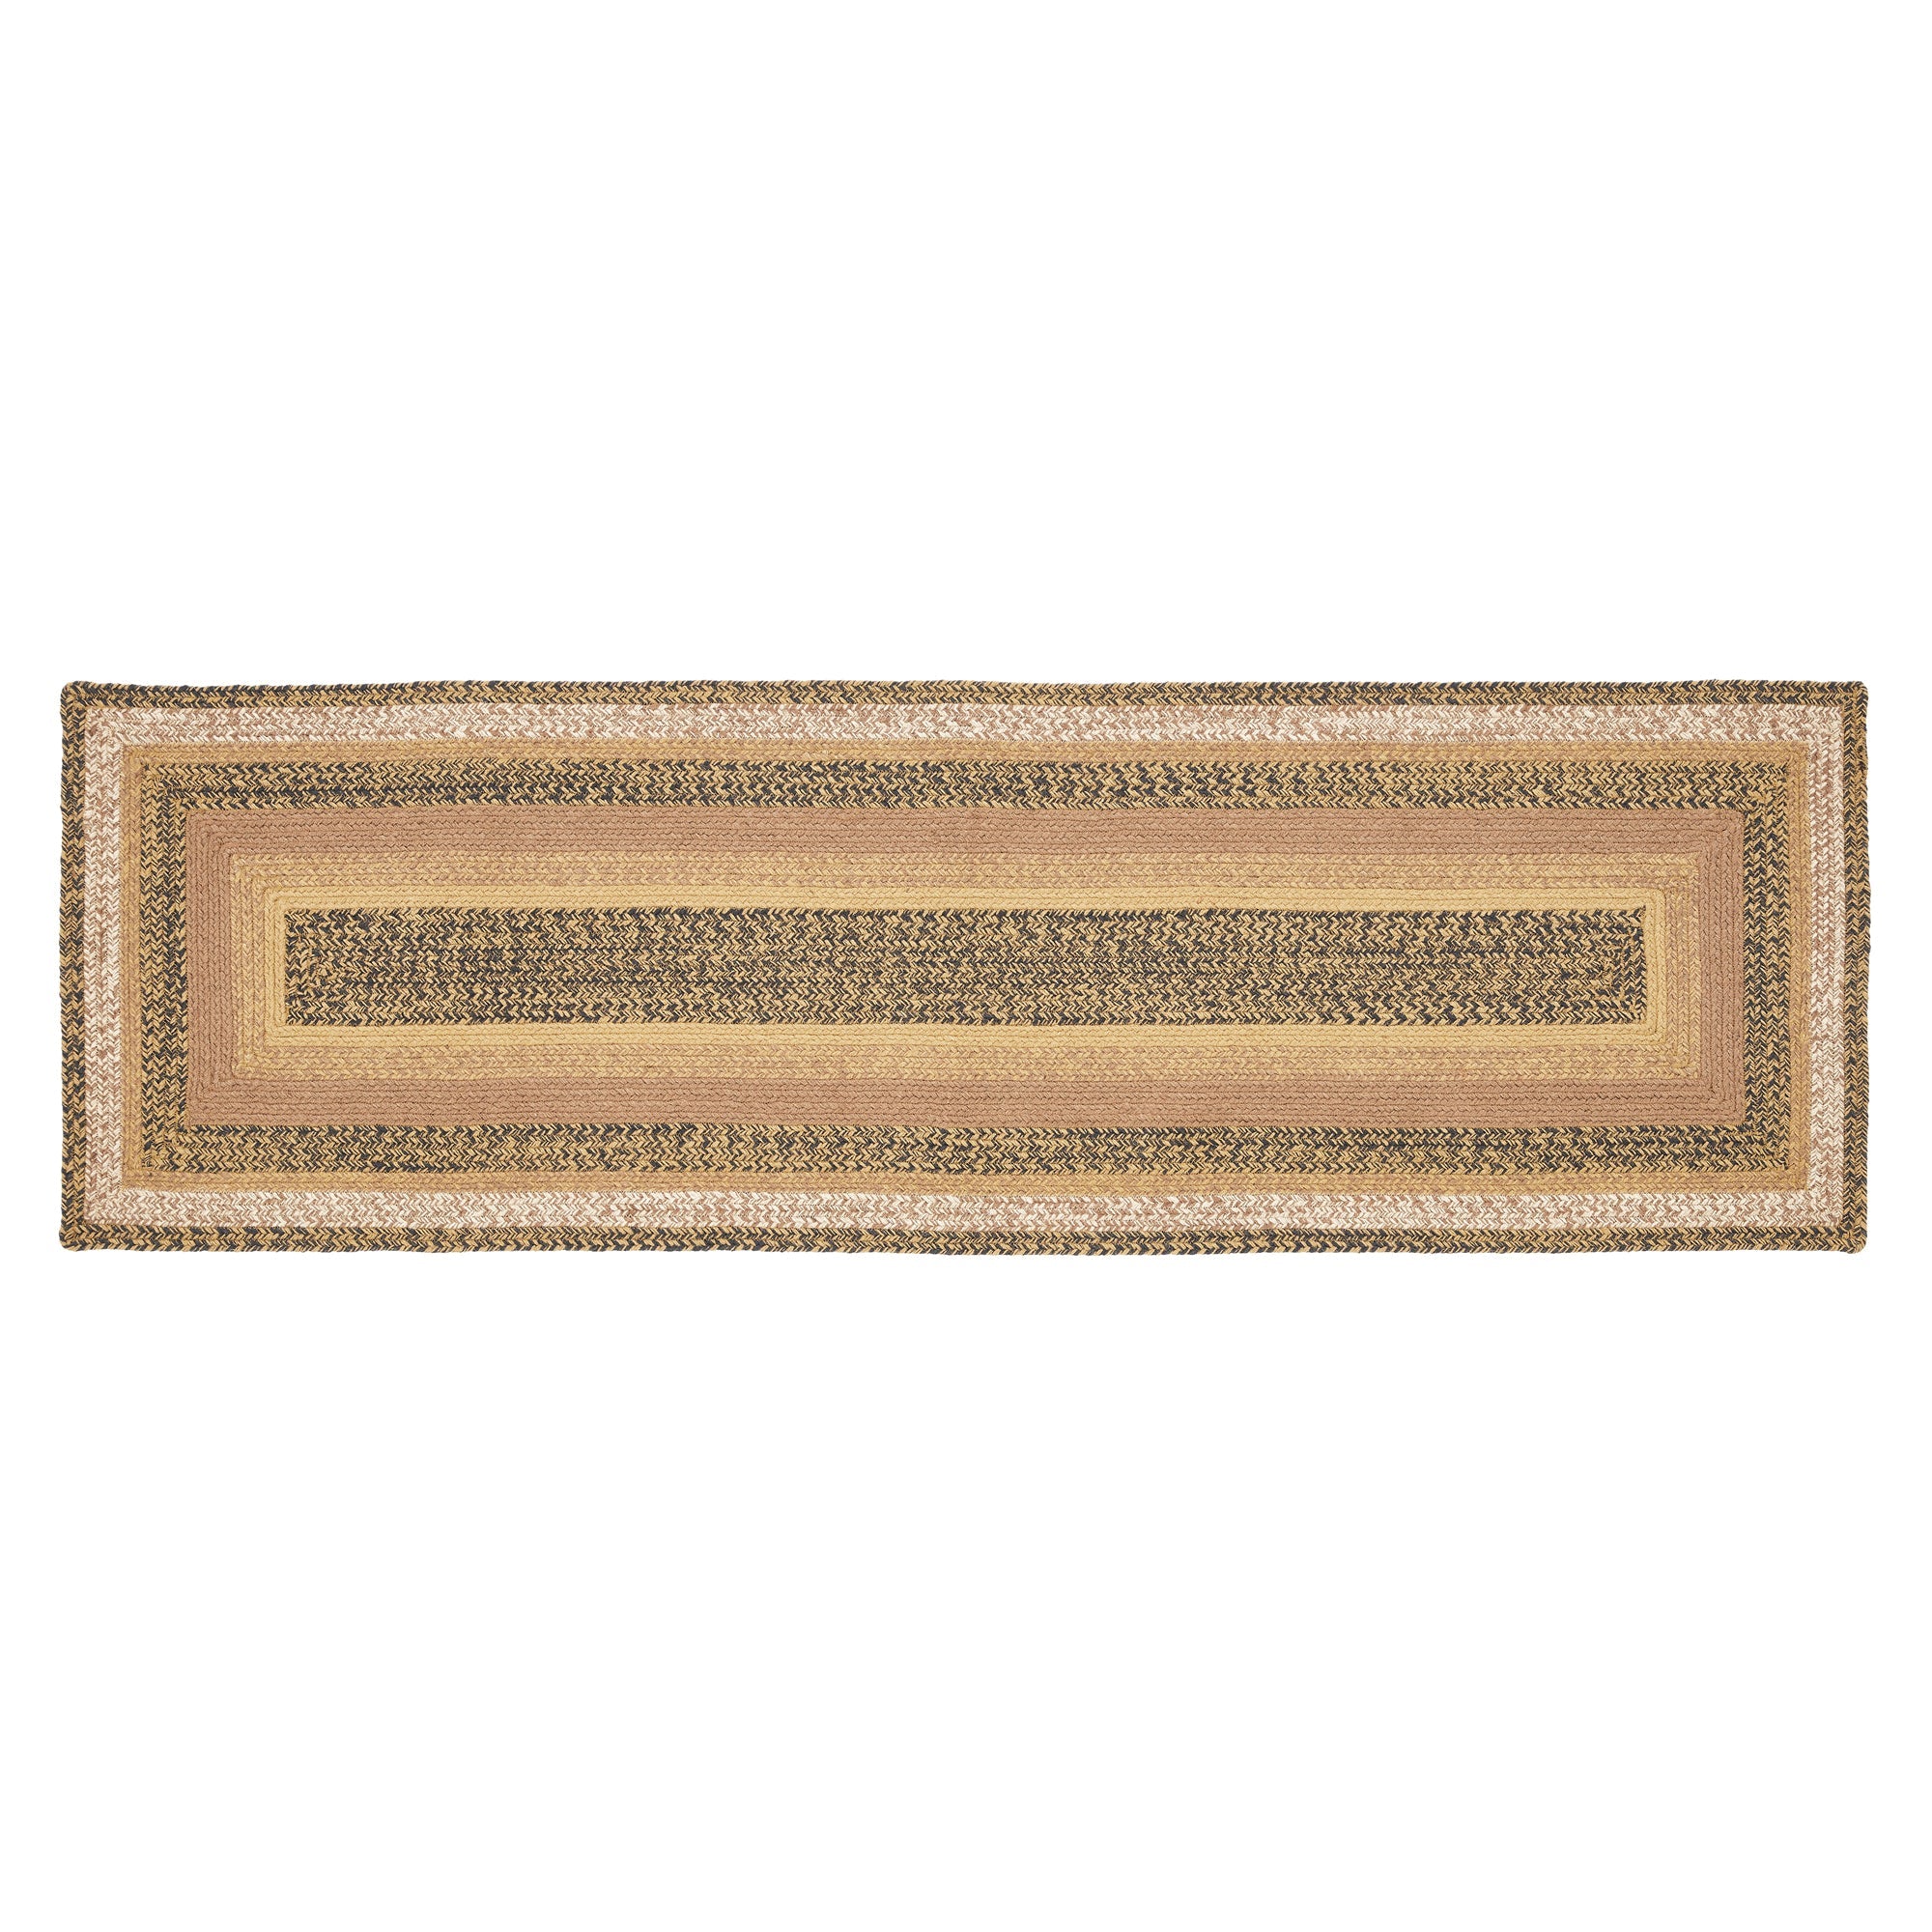 Kettle Grove Jute Braided Rug/Runner Rect. with Rug Pad 2'x6.5' VHC Brands